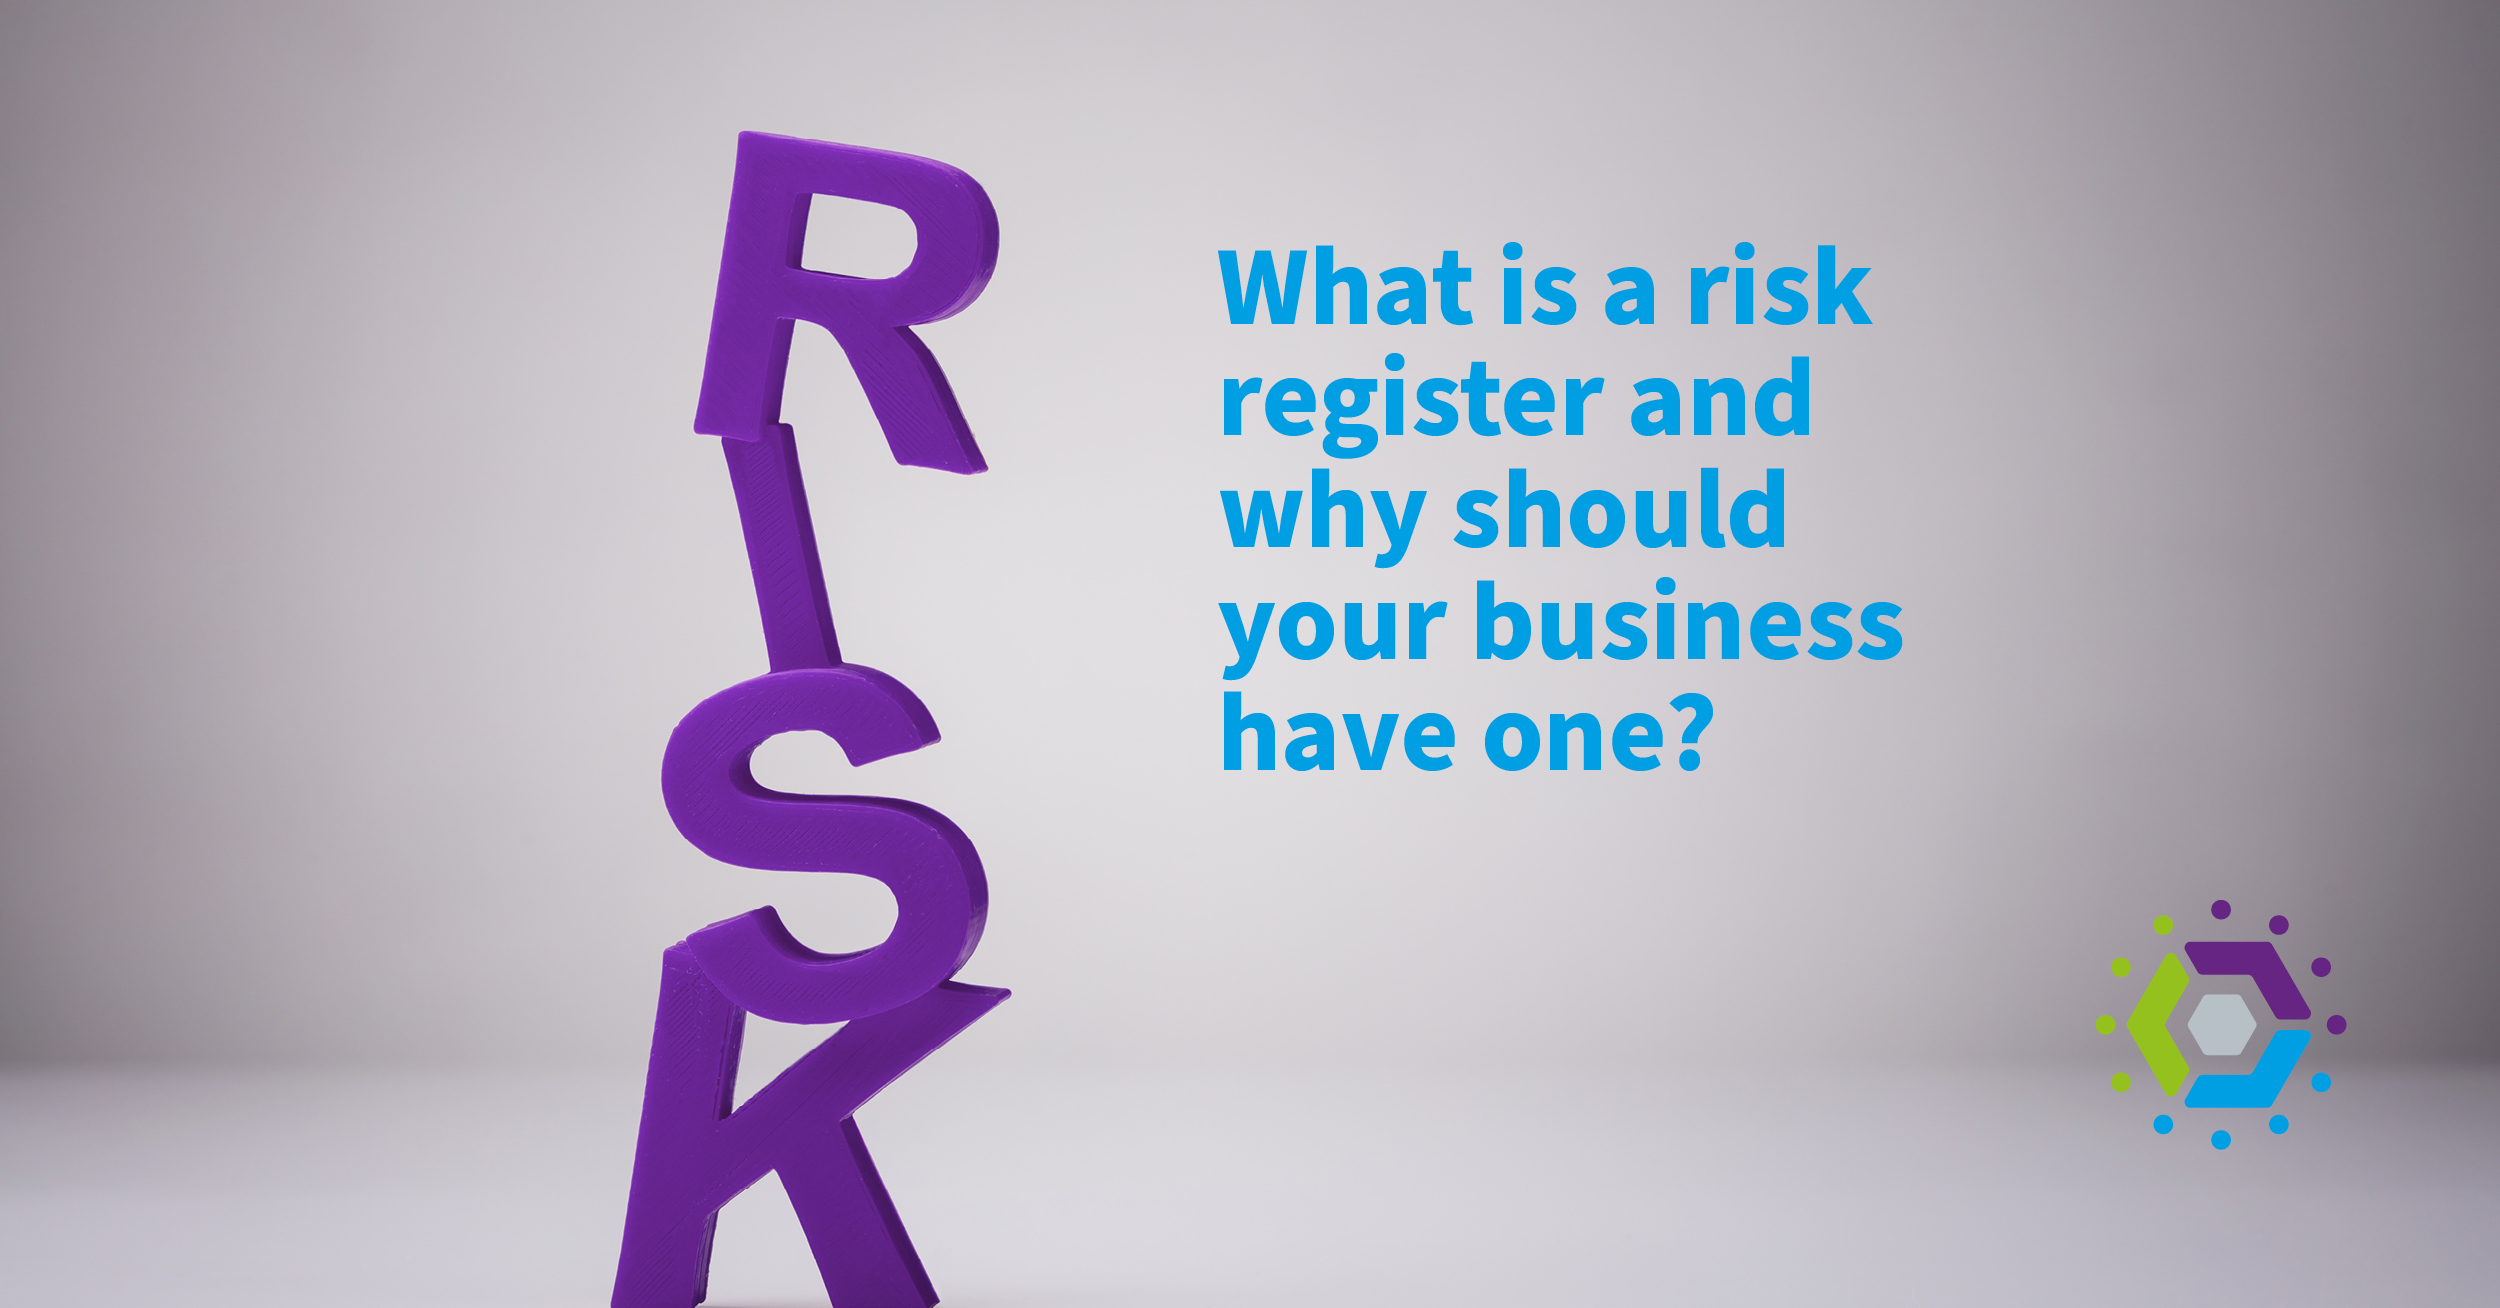 What is a risk register and why should your business have one?